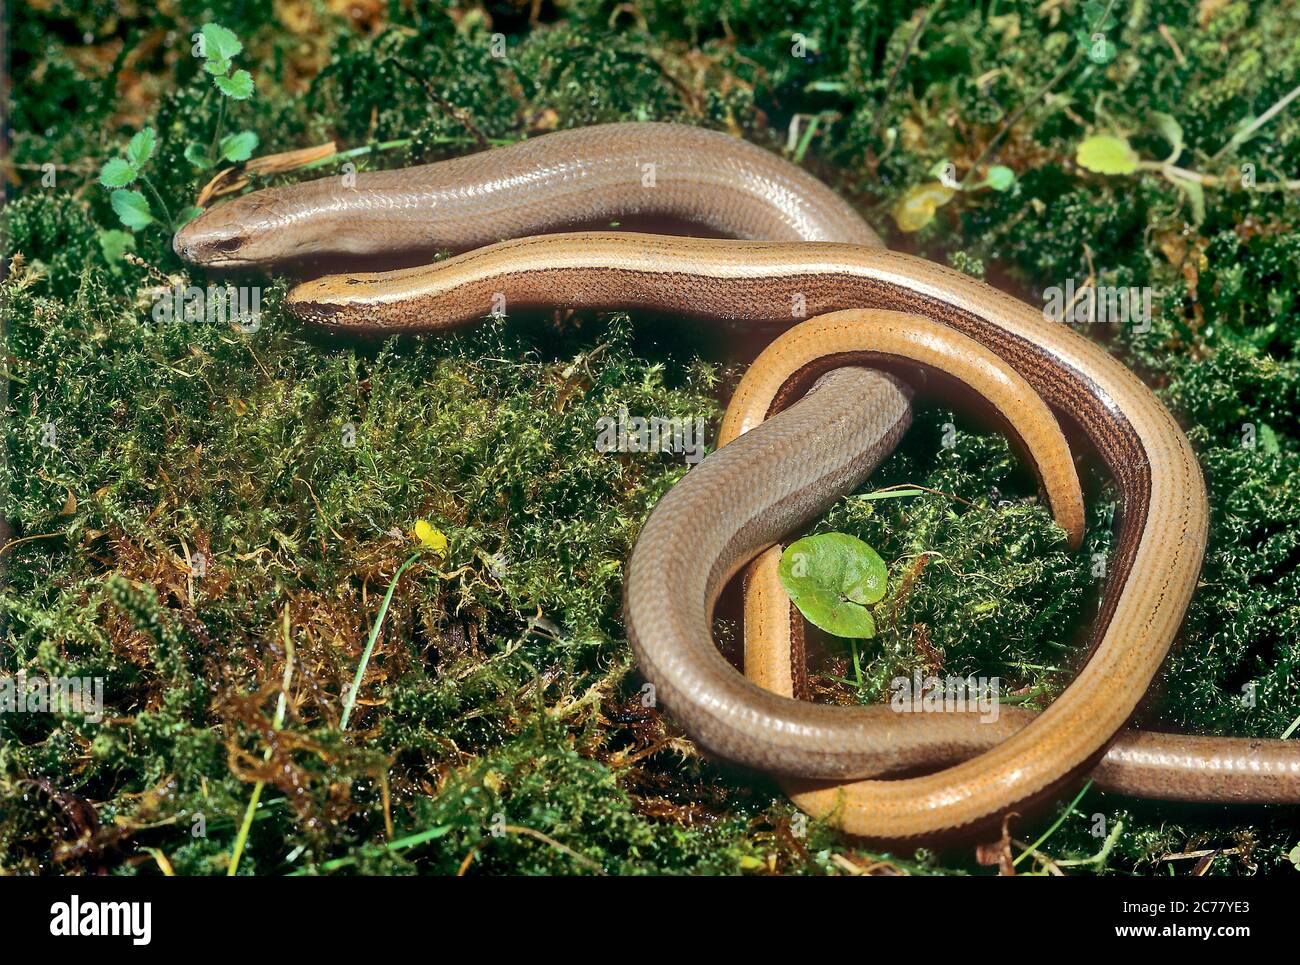 Slow Worm (Anguis fragilis). Couple at mating season. The male is smaller, slimmer and golden colored. Germany Stock Photo